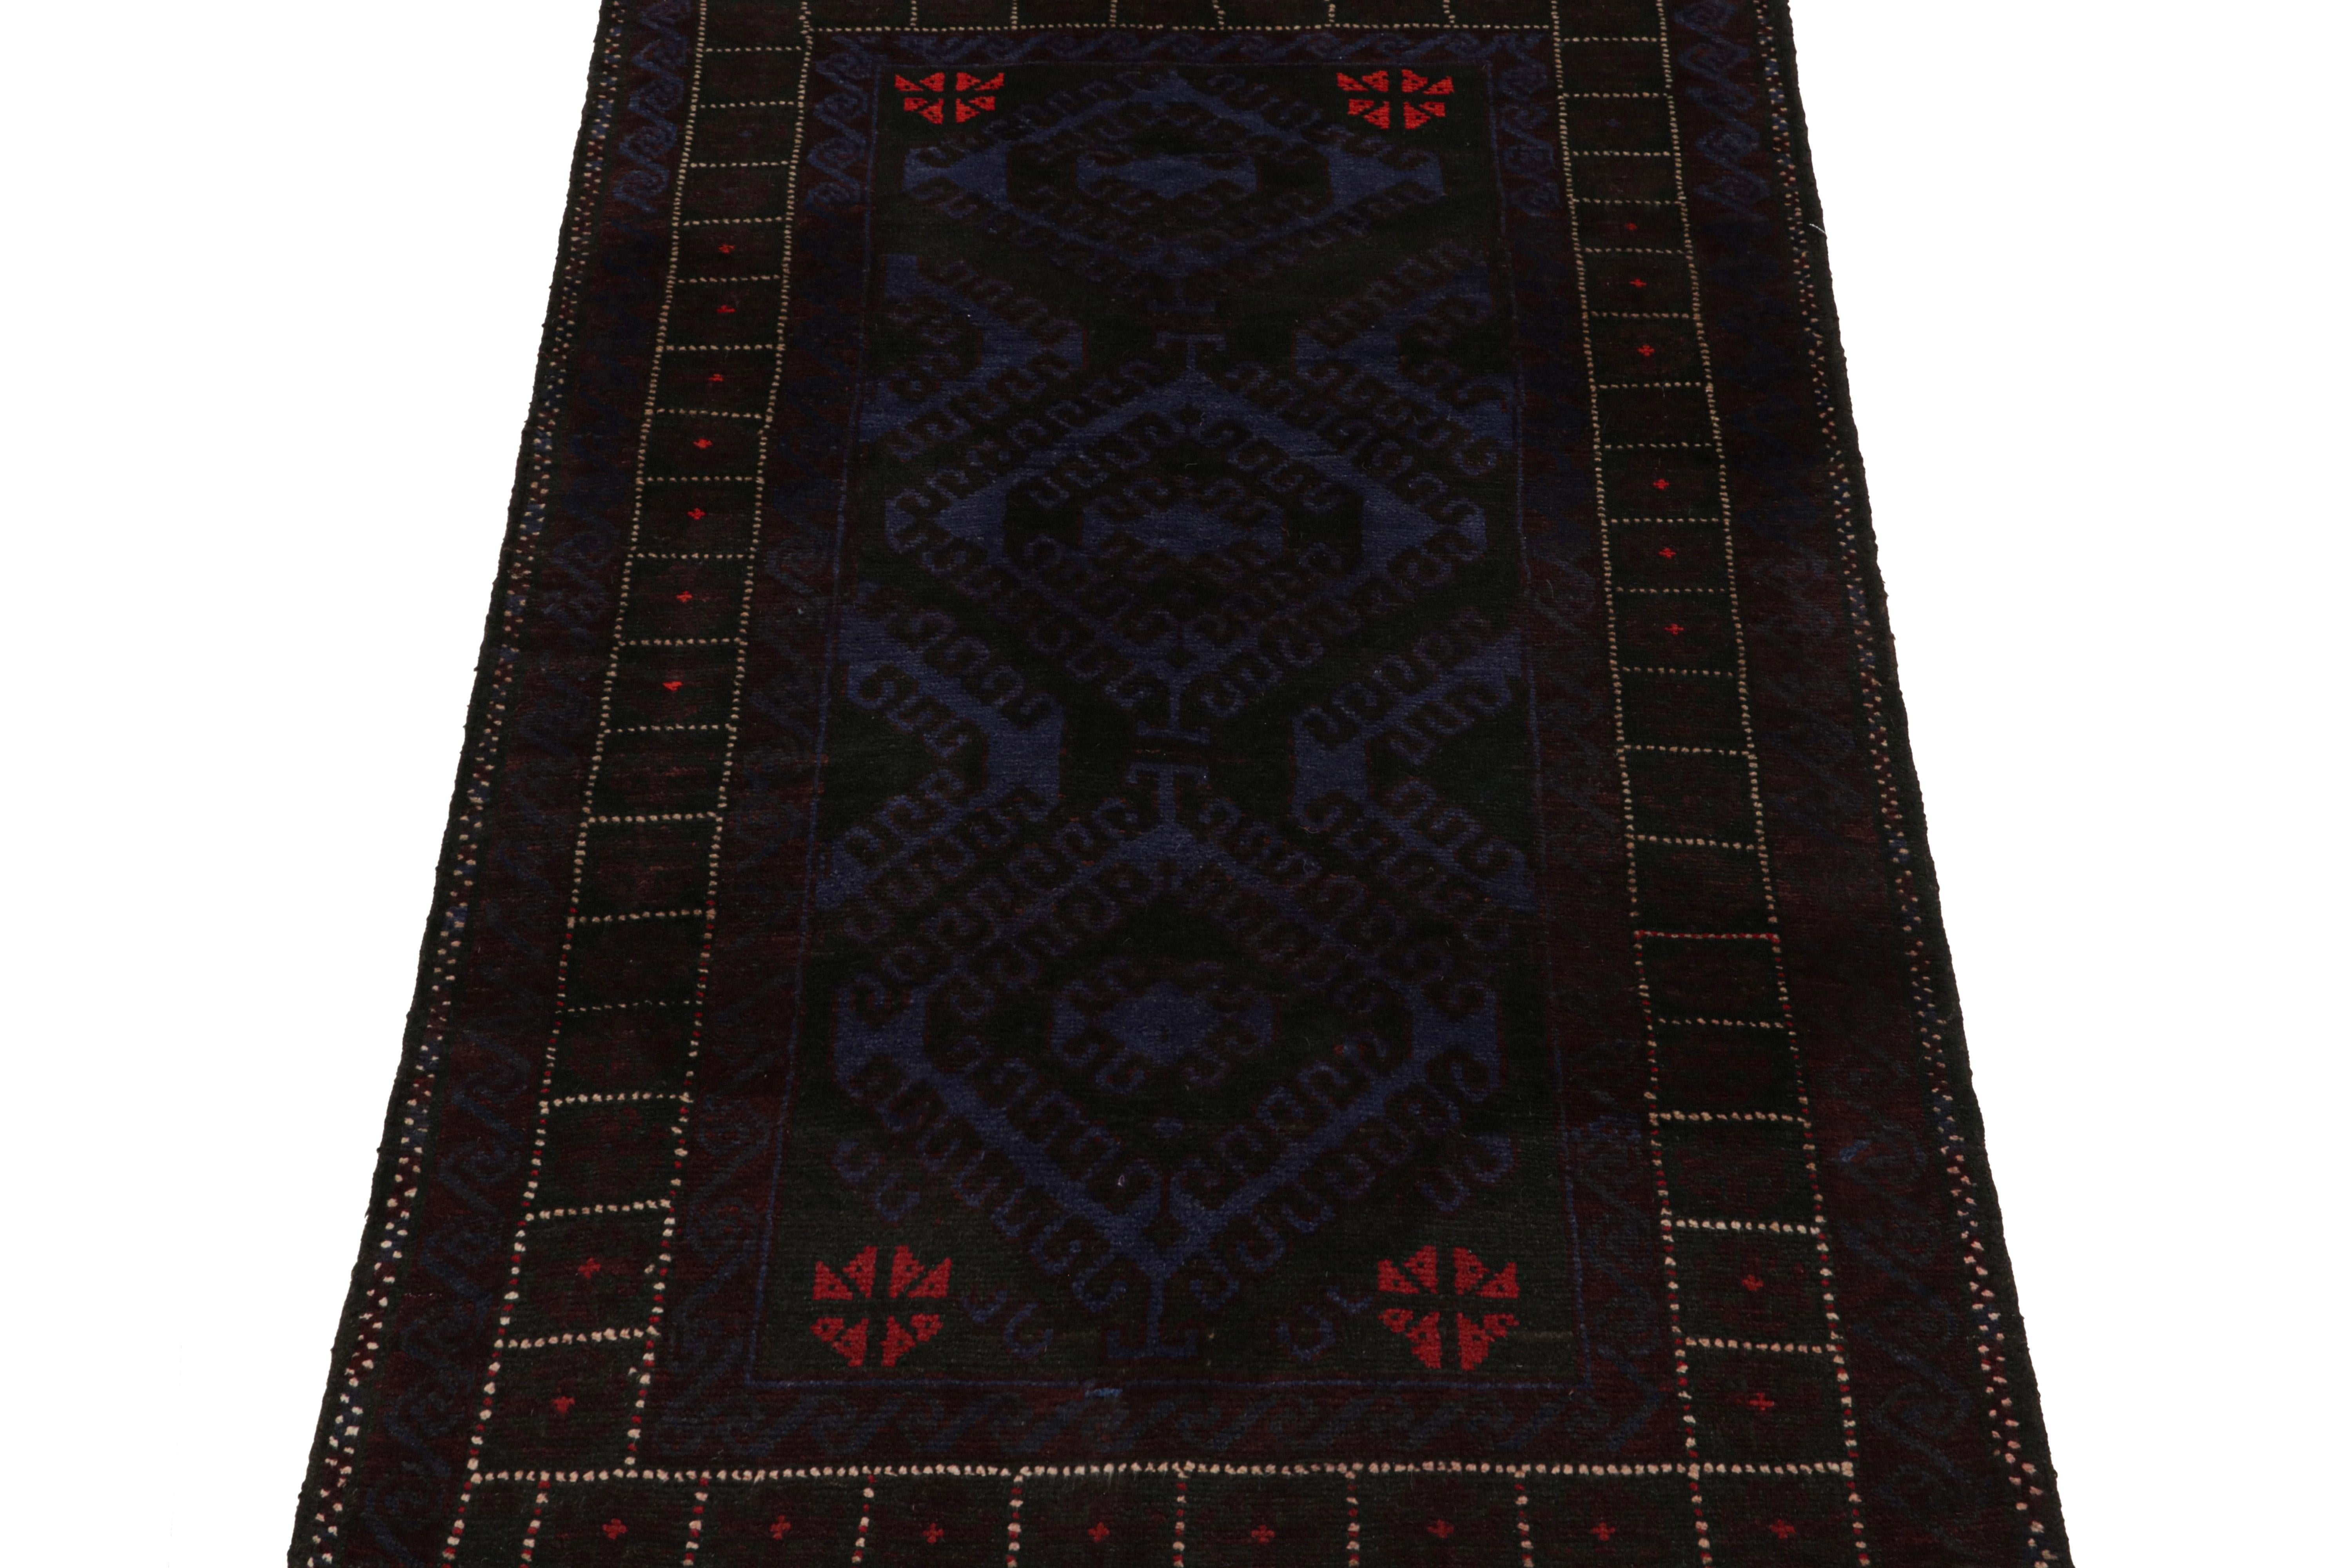 Afghan Vintage Baluch Tribal Rug with Blue & Black Geometric Patterns, from Rug & Kilim For Sale